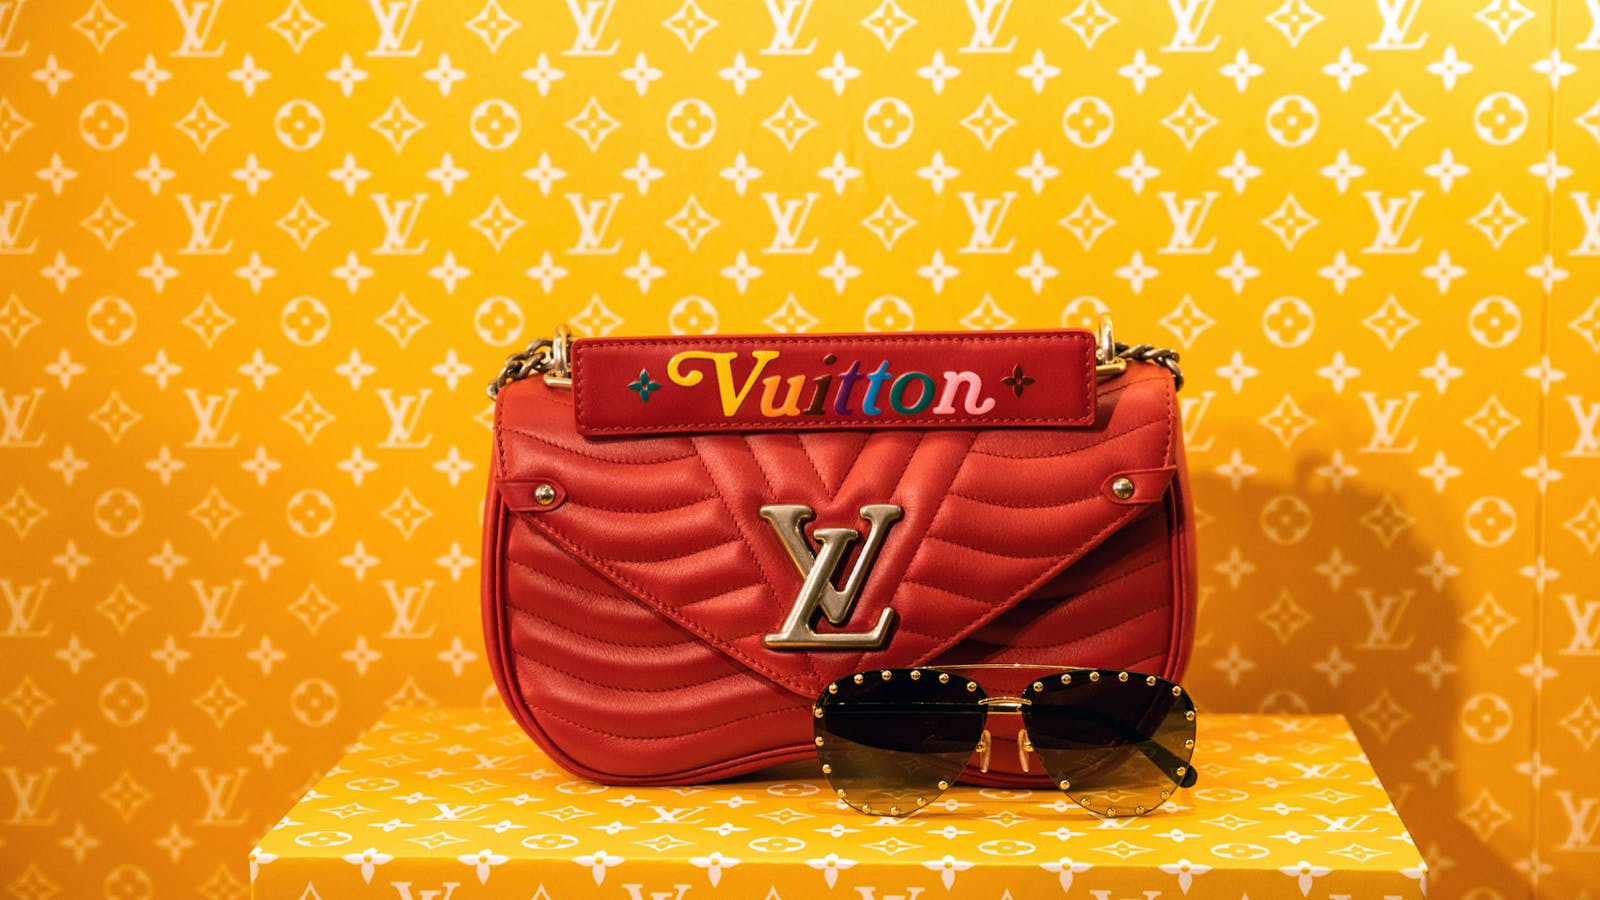 From Gucci to Louis Vuitton, 25-year-old finds success selling